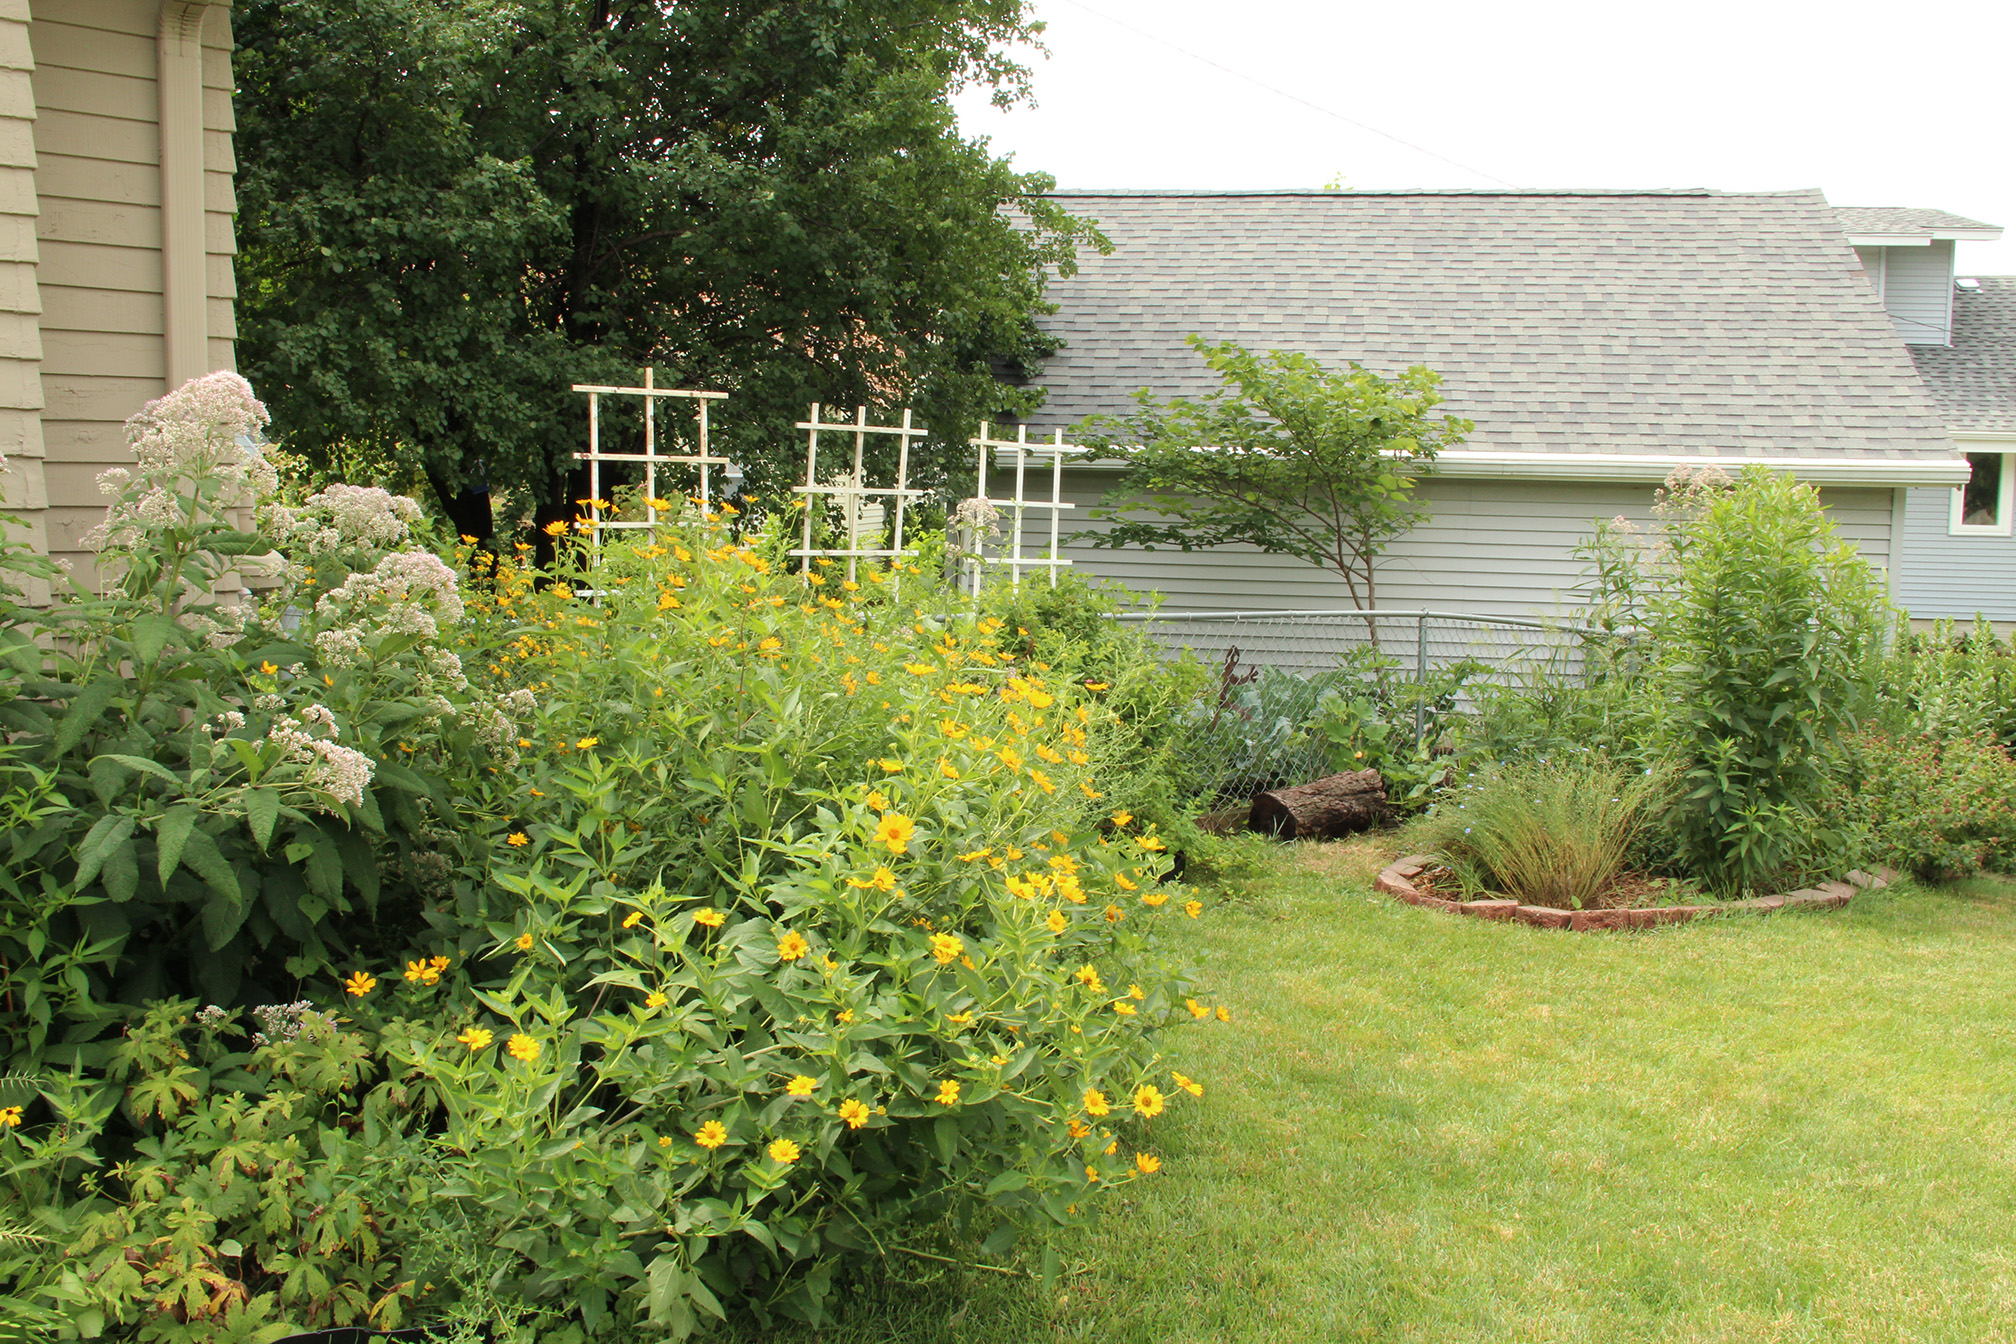 A view of a garden on a summer day. On the left is a flower border growing against the side of the house. It is full of tall yellow and white flowers. Beyond the flowers is the garden fence. Close to the bottom of the fence is a large log, and to the right is another, smaller flower border. Between the borders is a grass lawn.